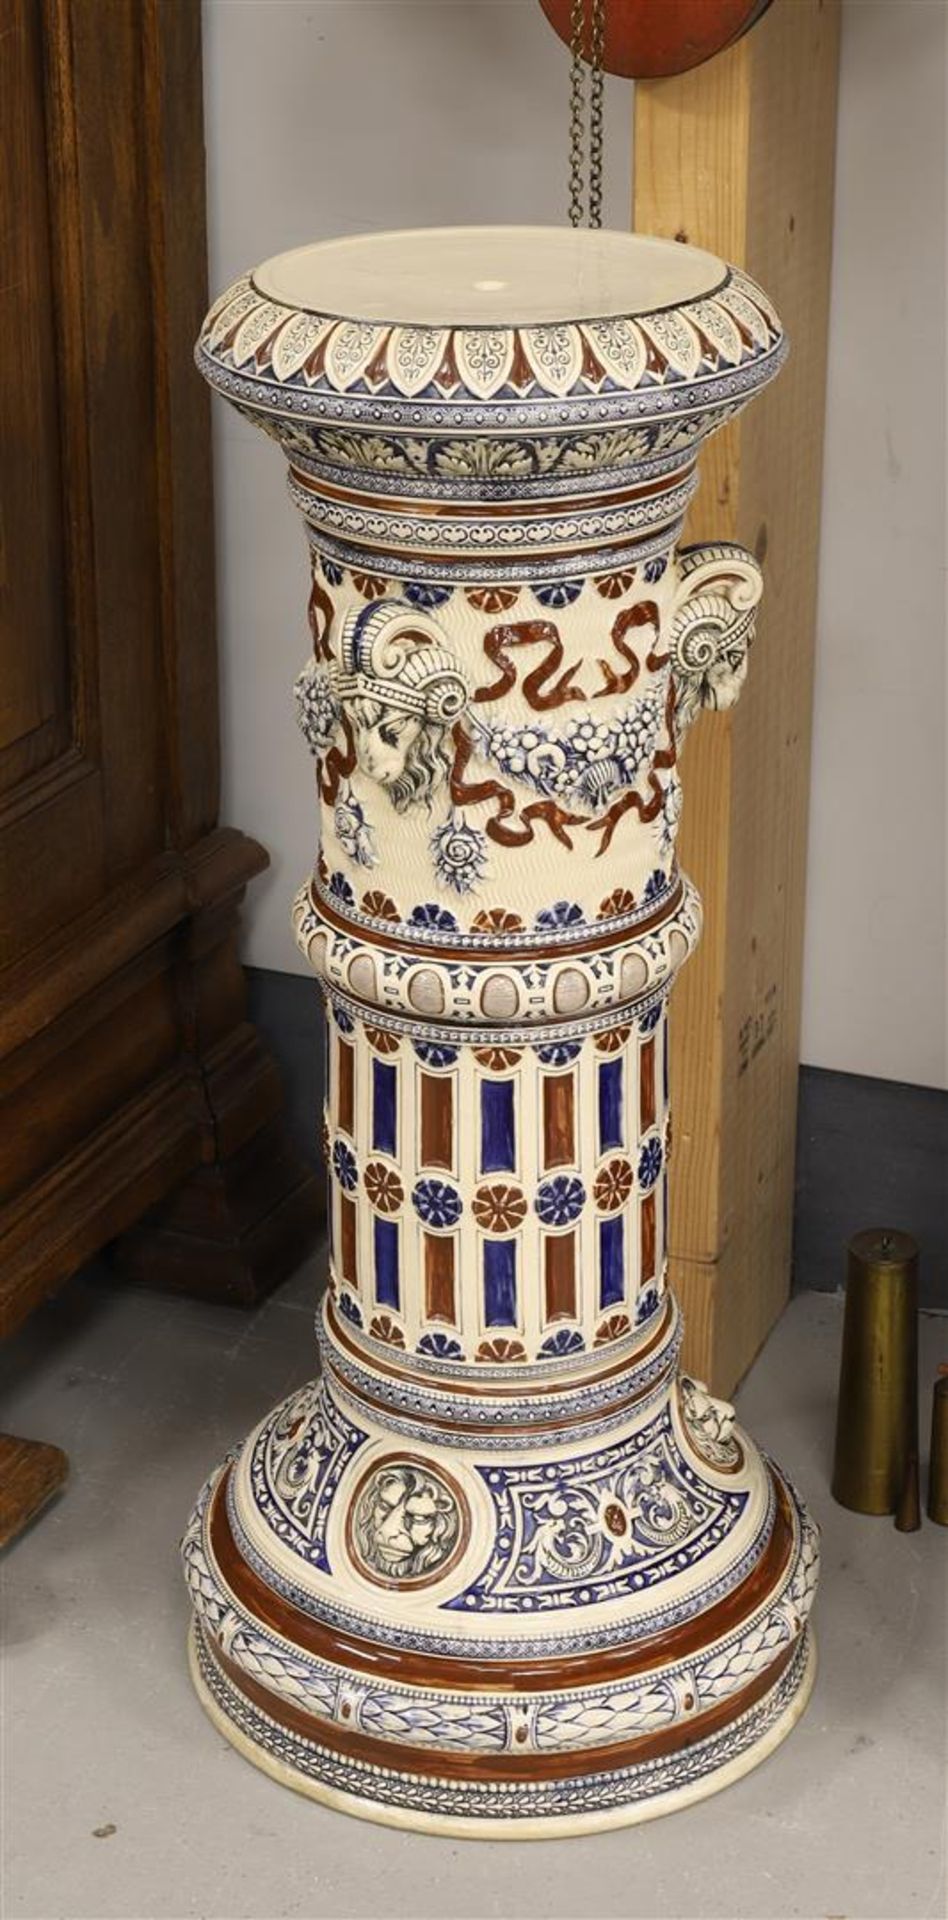 A cylindrical stoneware pedestal, Germany, early 20th century. Decor of ram heads, garlands and